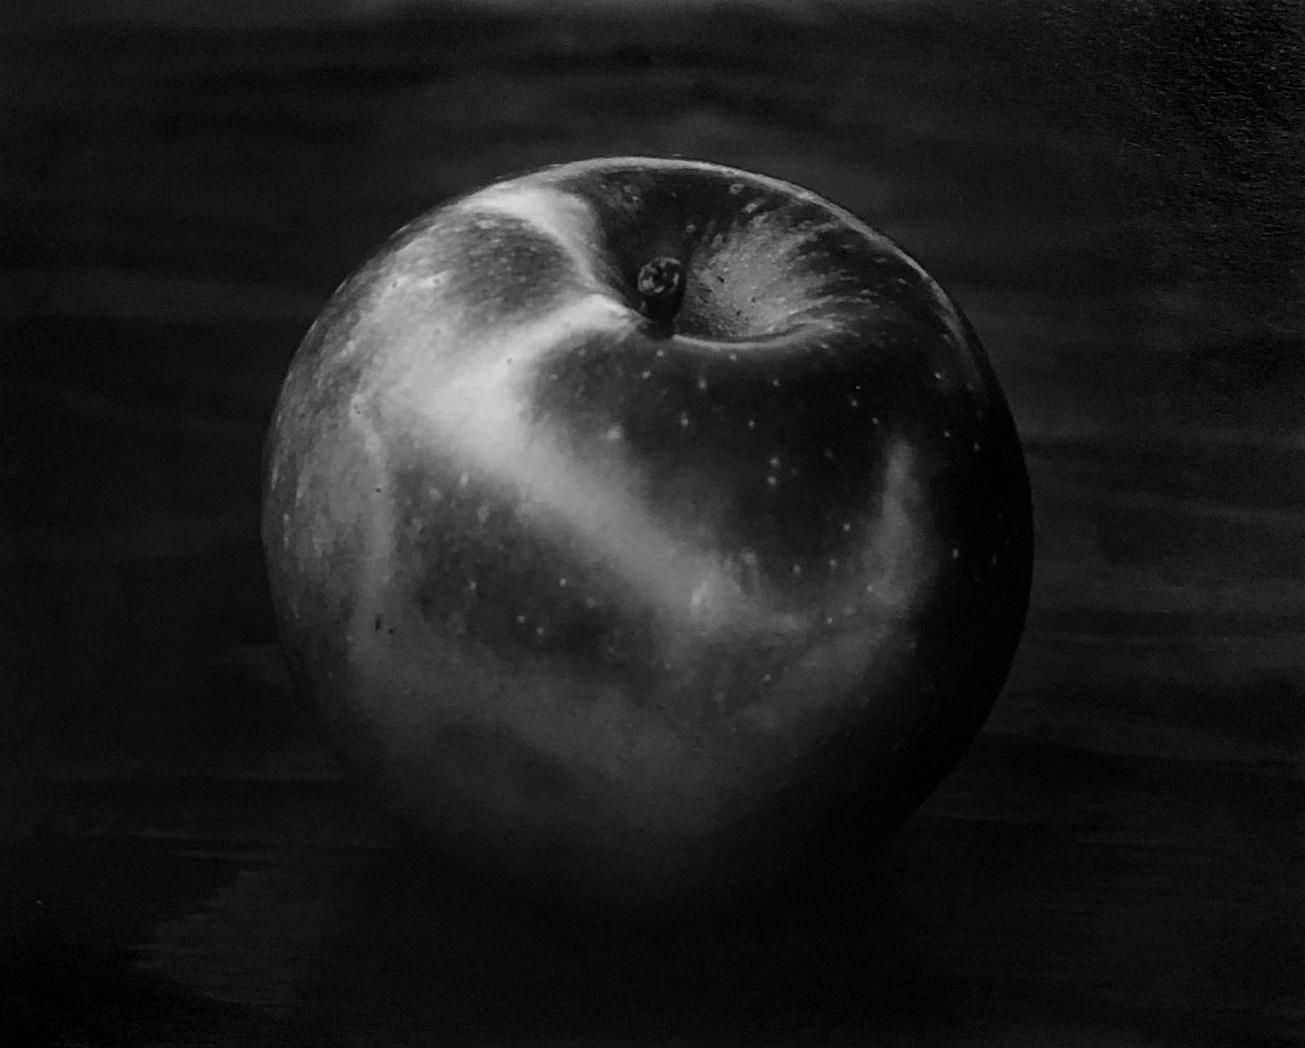 Paul Caponigro, Apple, Winthrop, MA,  1964, 8.5 x 6.75", silver gelatin print. Signed, titled and dated on mount recto. Excellent condition